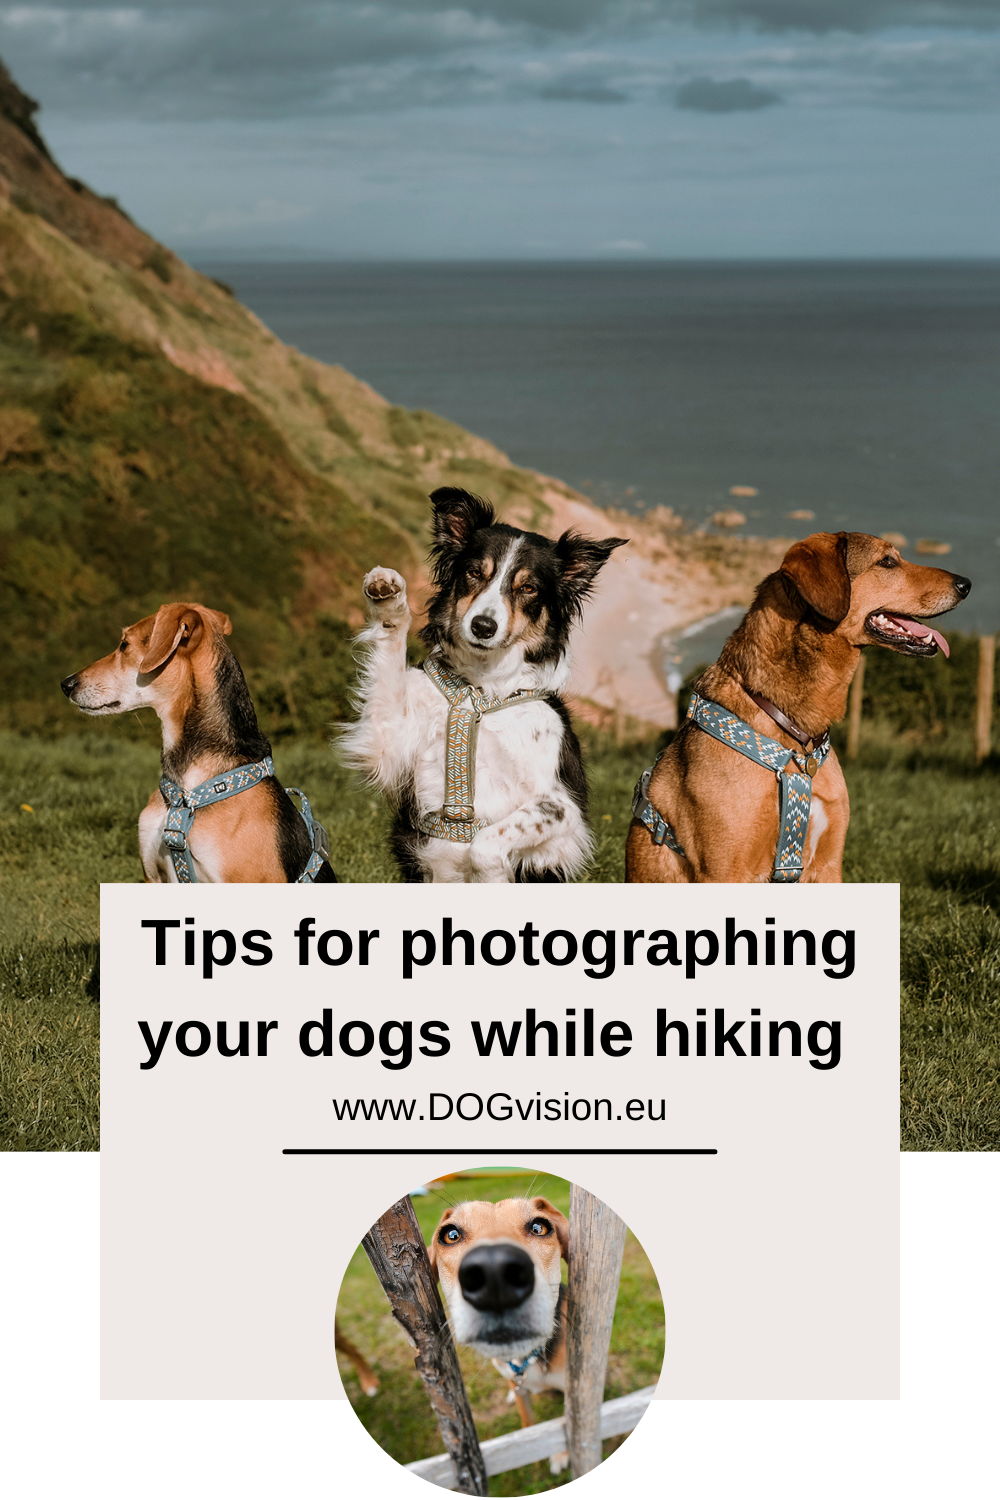 Tips for photographing your dogs while hiking